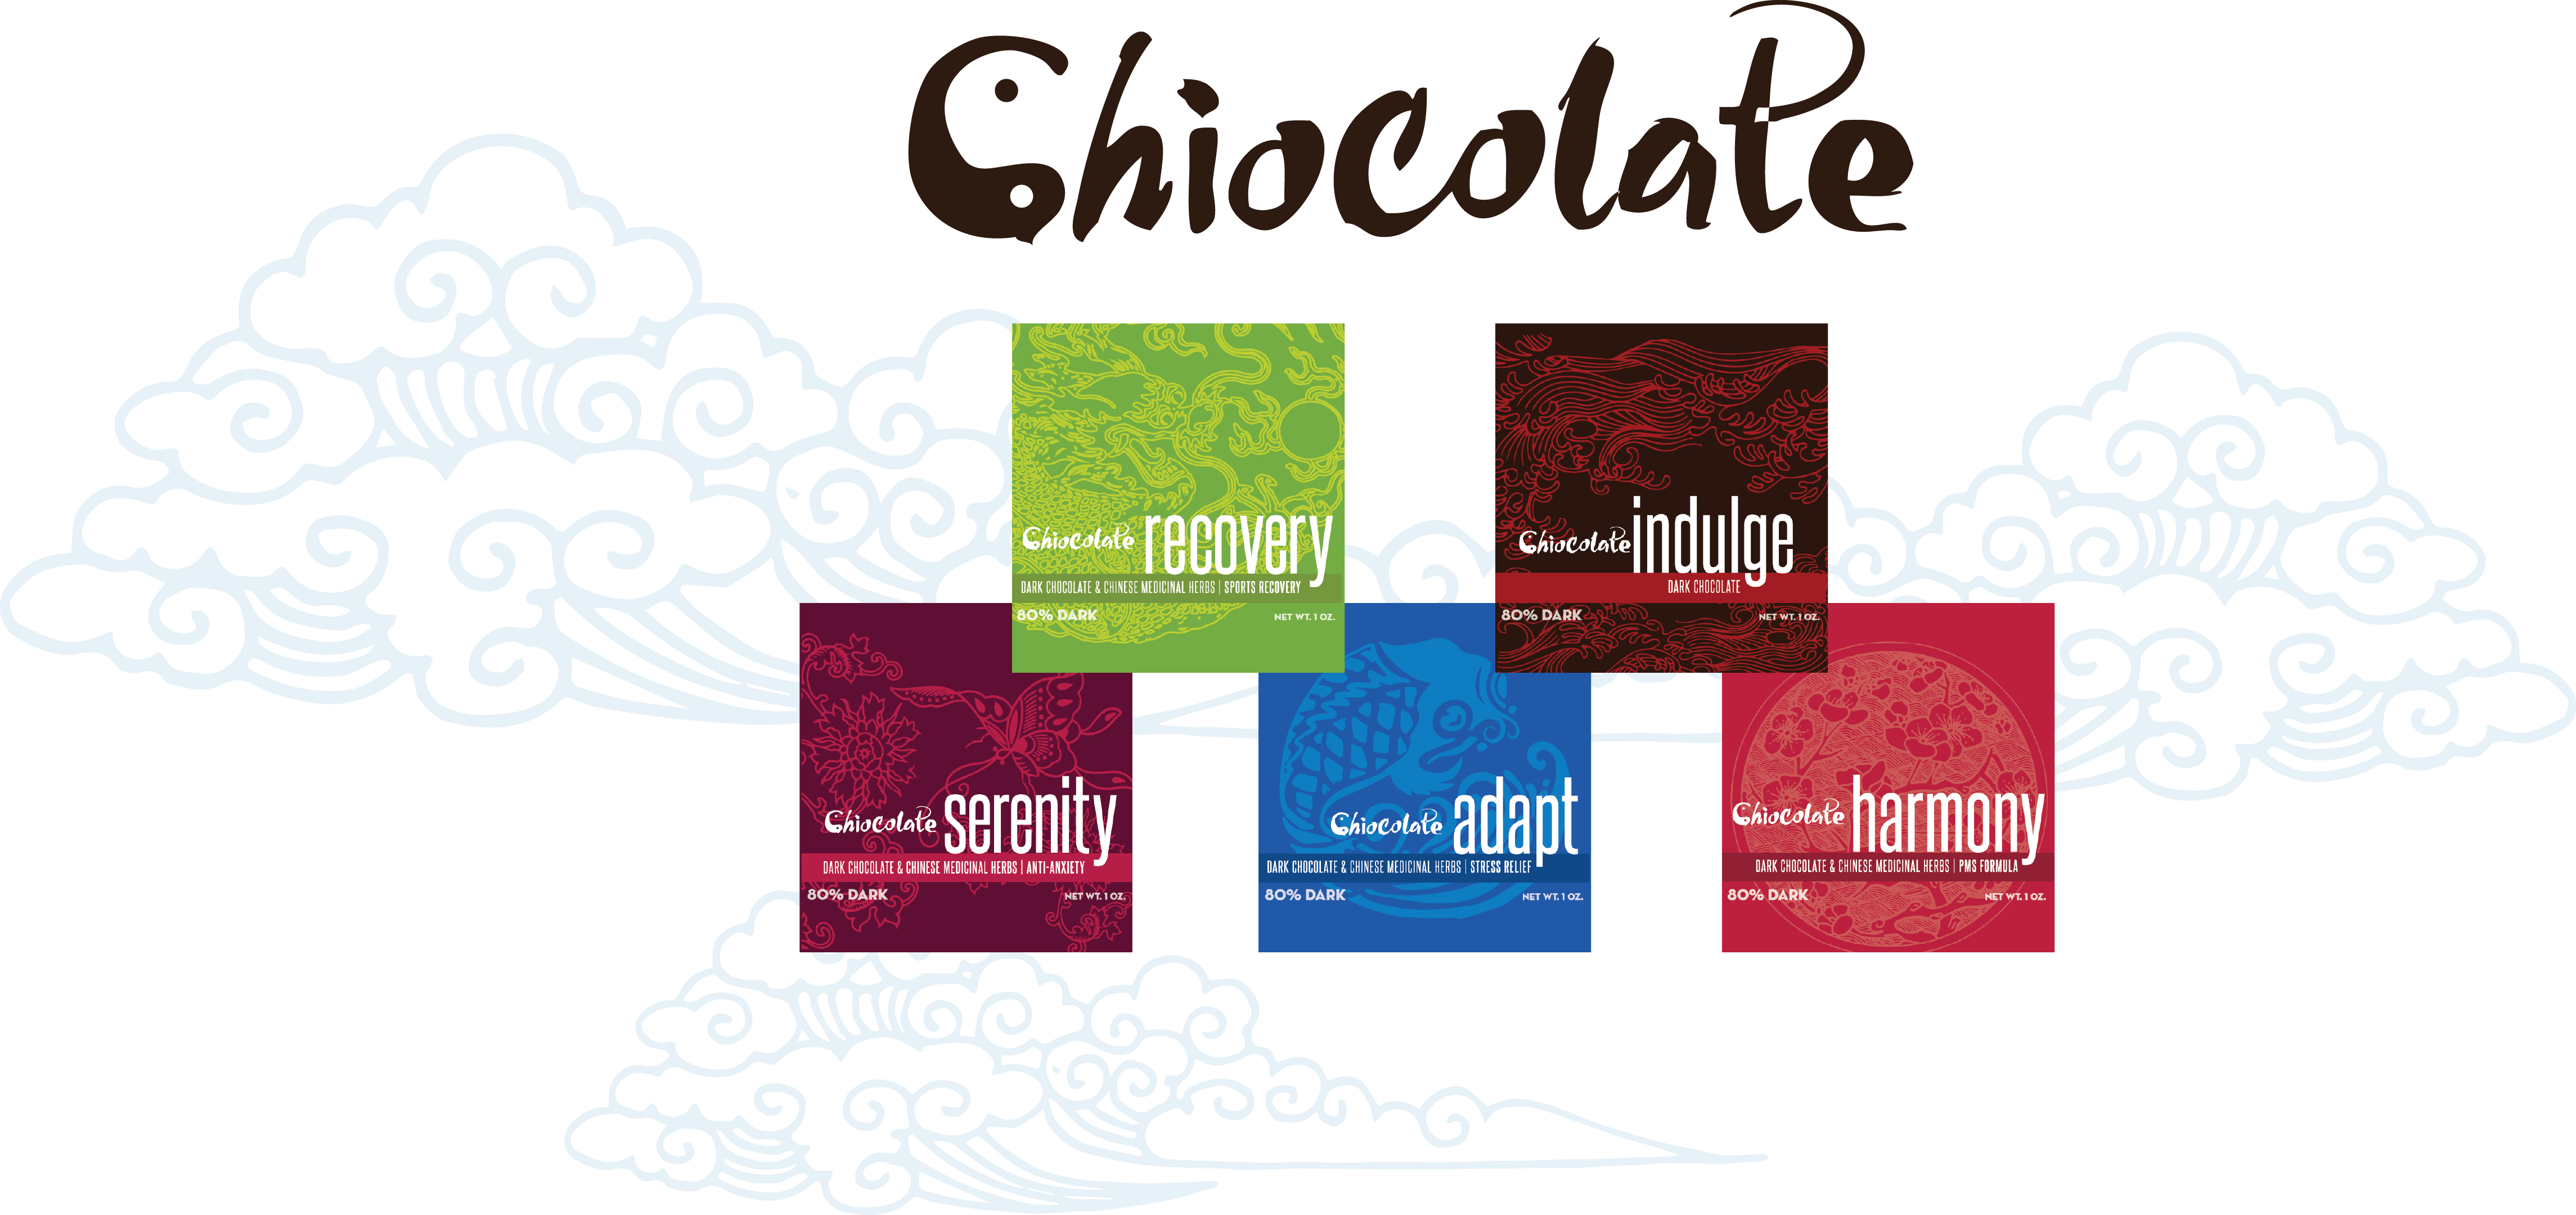 chiocolate package designs